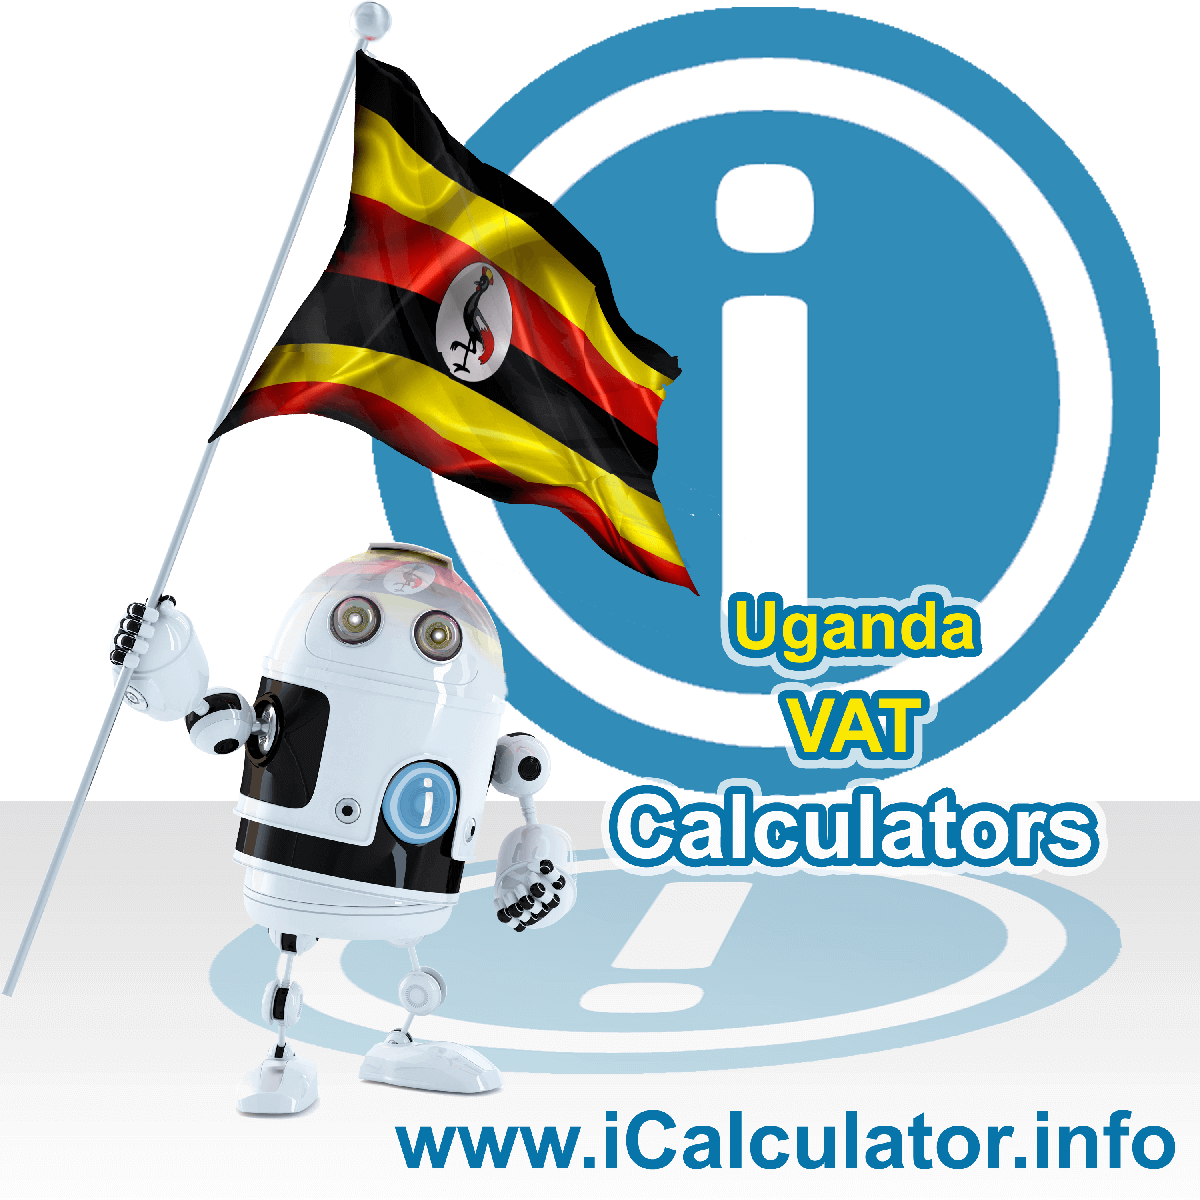 Uganda VAT Calculator. This image shows the Uganda flag and information relating to the VAT formula used for calculating Value Added Tax in Uganda using the Uganda VAT Calculator in 2023